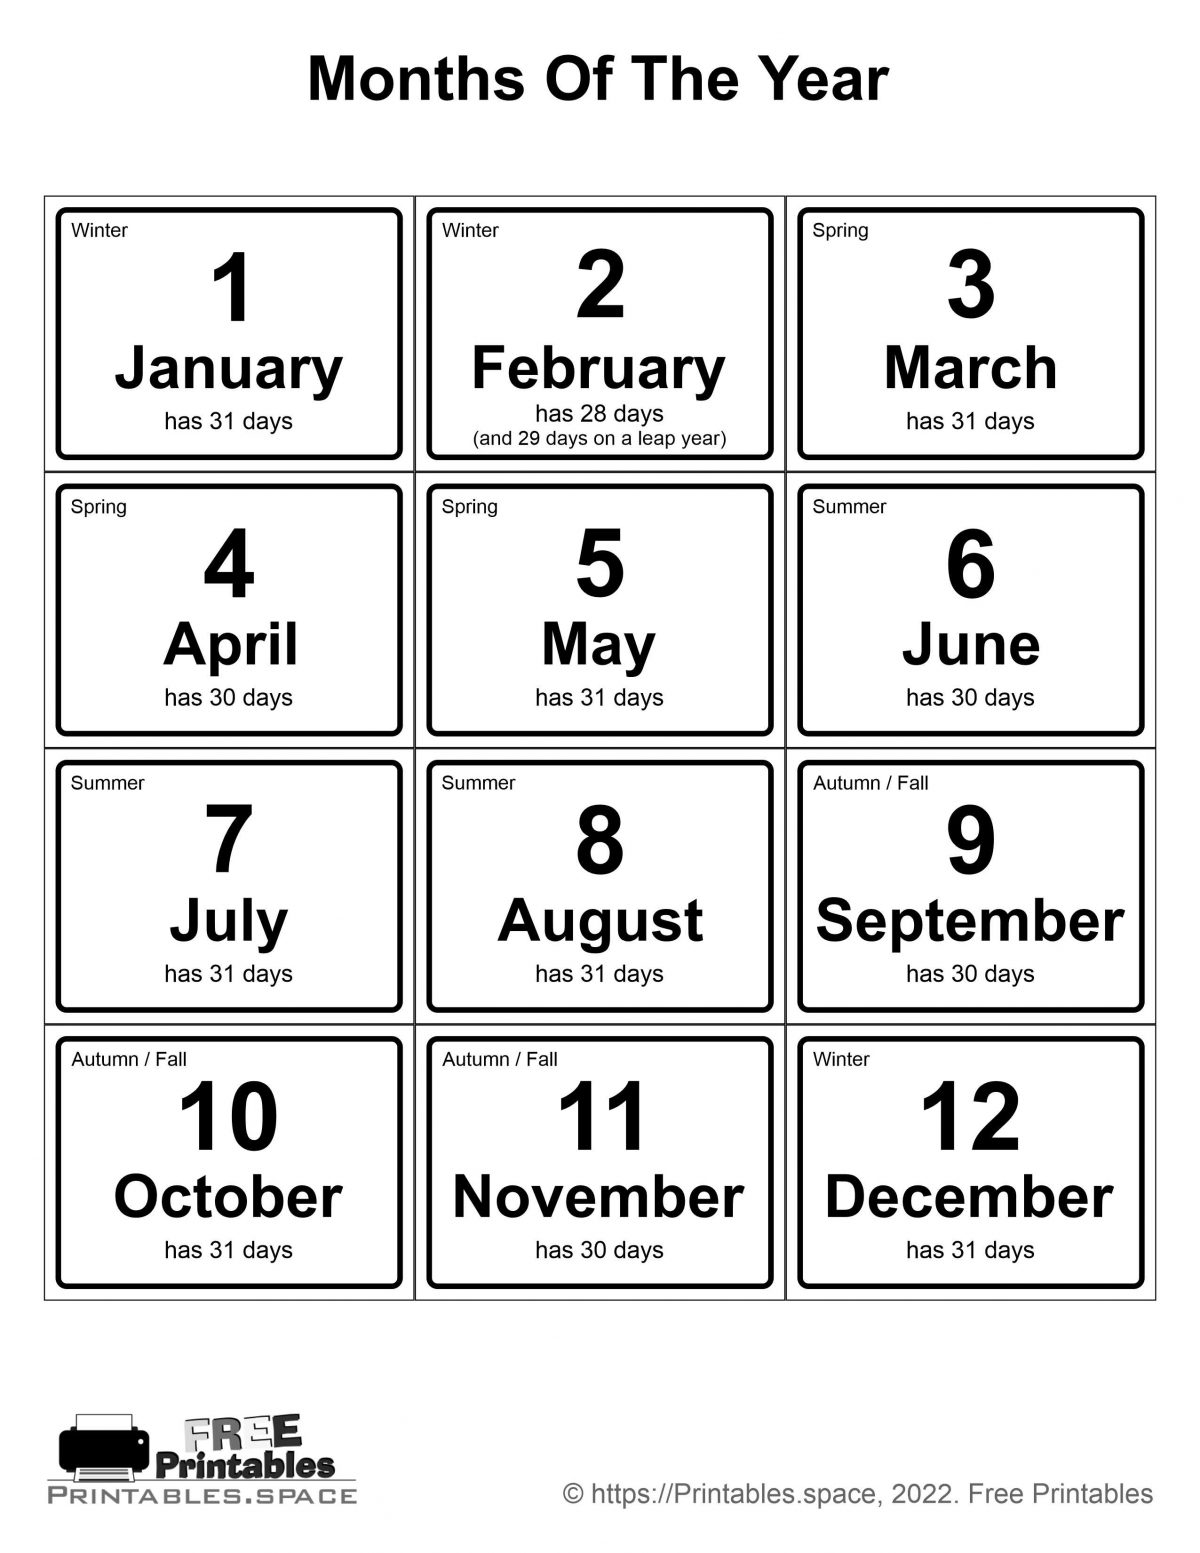 Months Of the Year With Numbers Chart